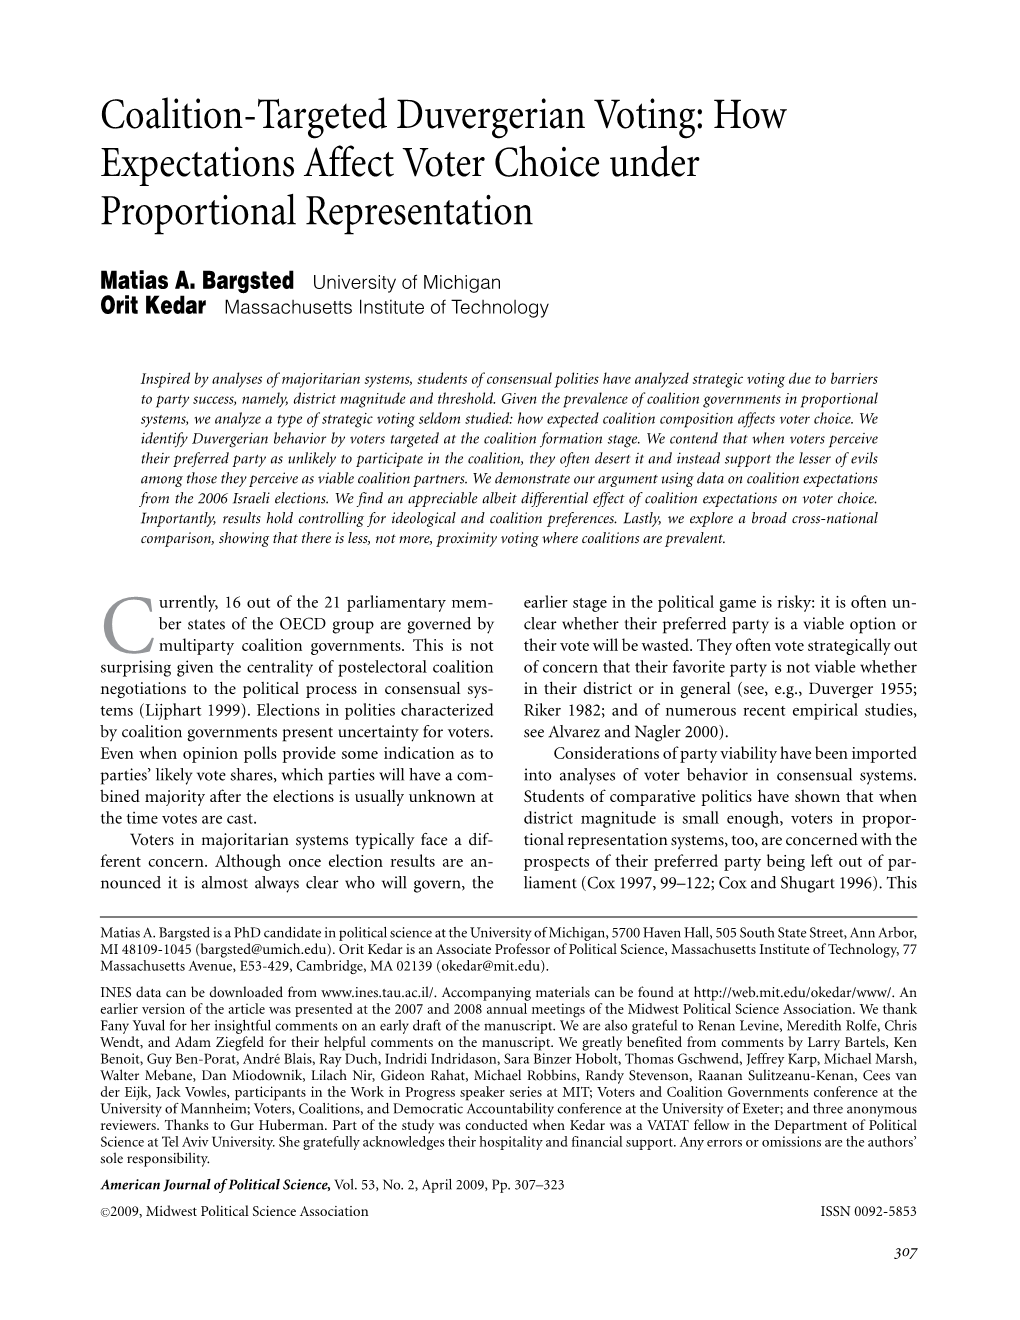 Coalition-Targeted Duvergerian Voting: How Expectations Affect Voter Choice Under Proportional Representation